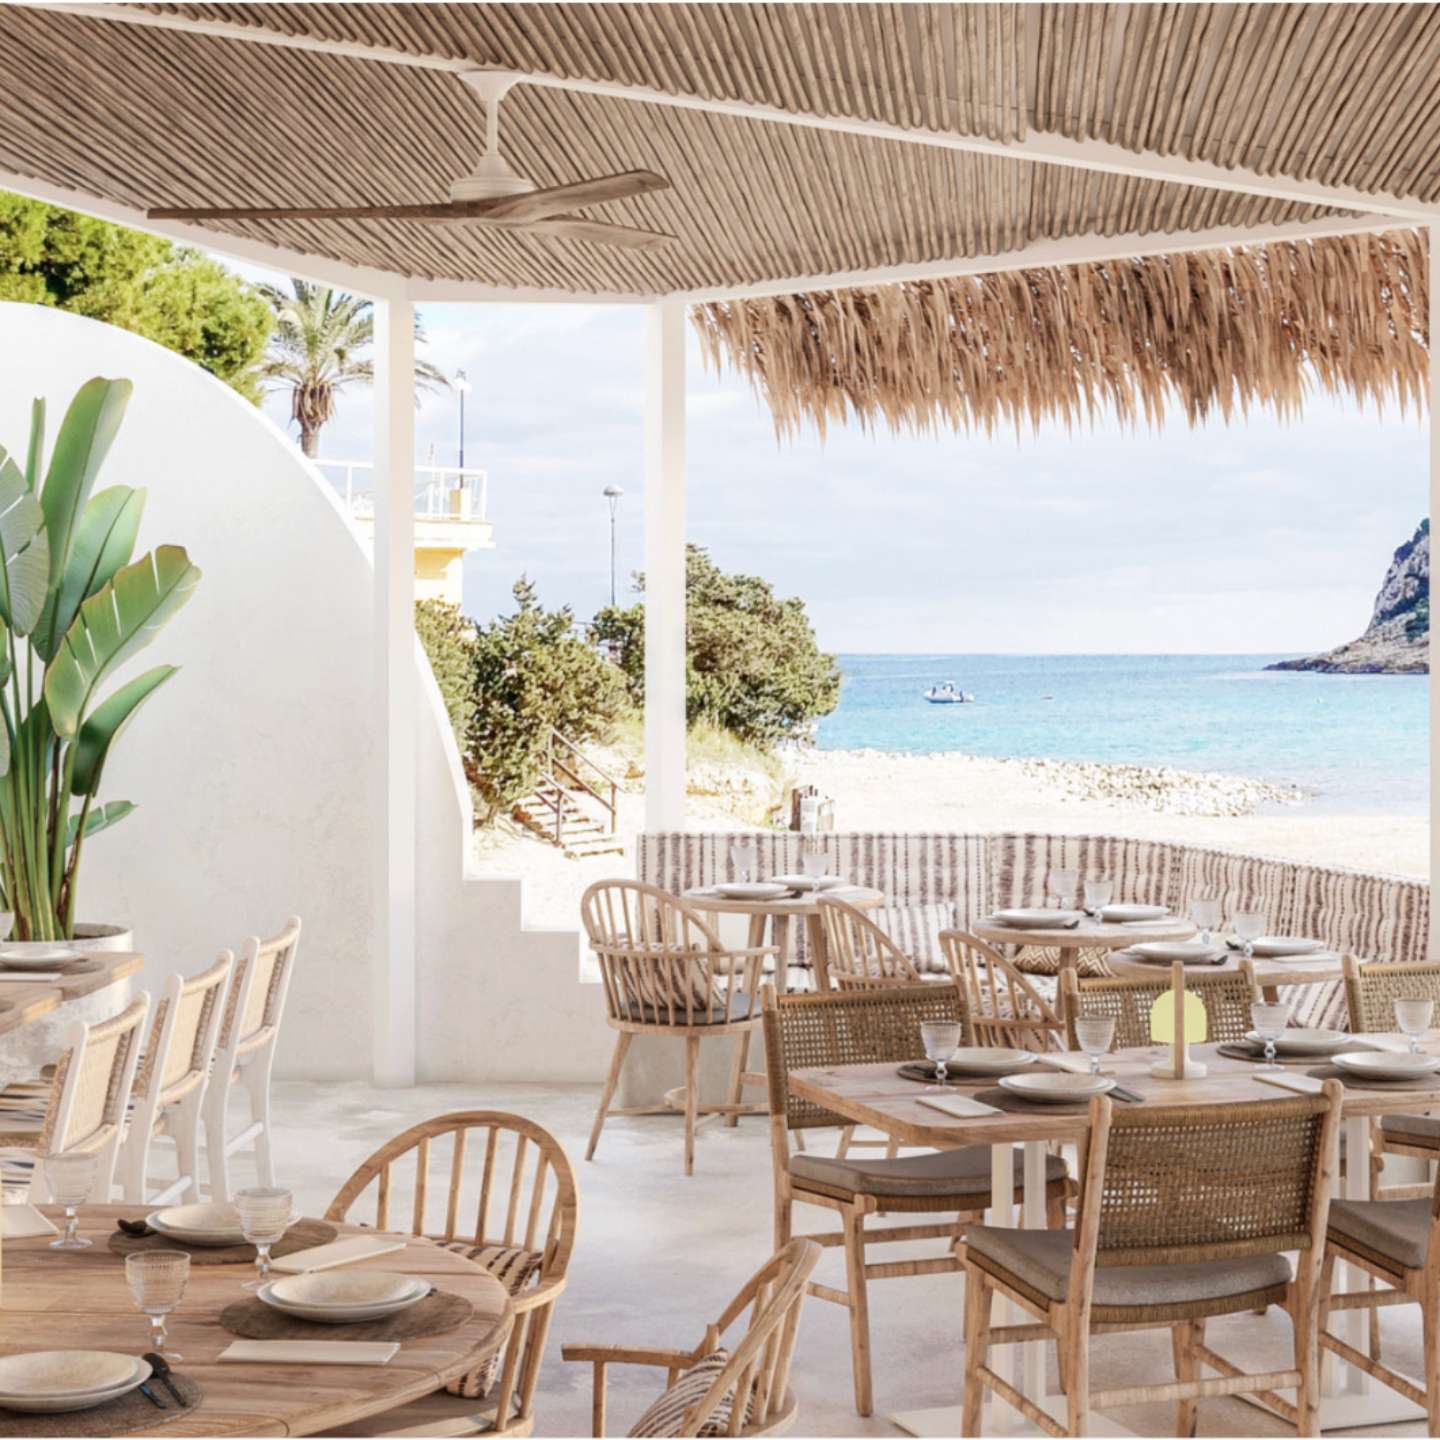 Outdoor restaurant space with light wooden and wicker chairs and tables with white walls and straw patio cover overlooking a beach and blue sea